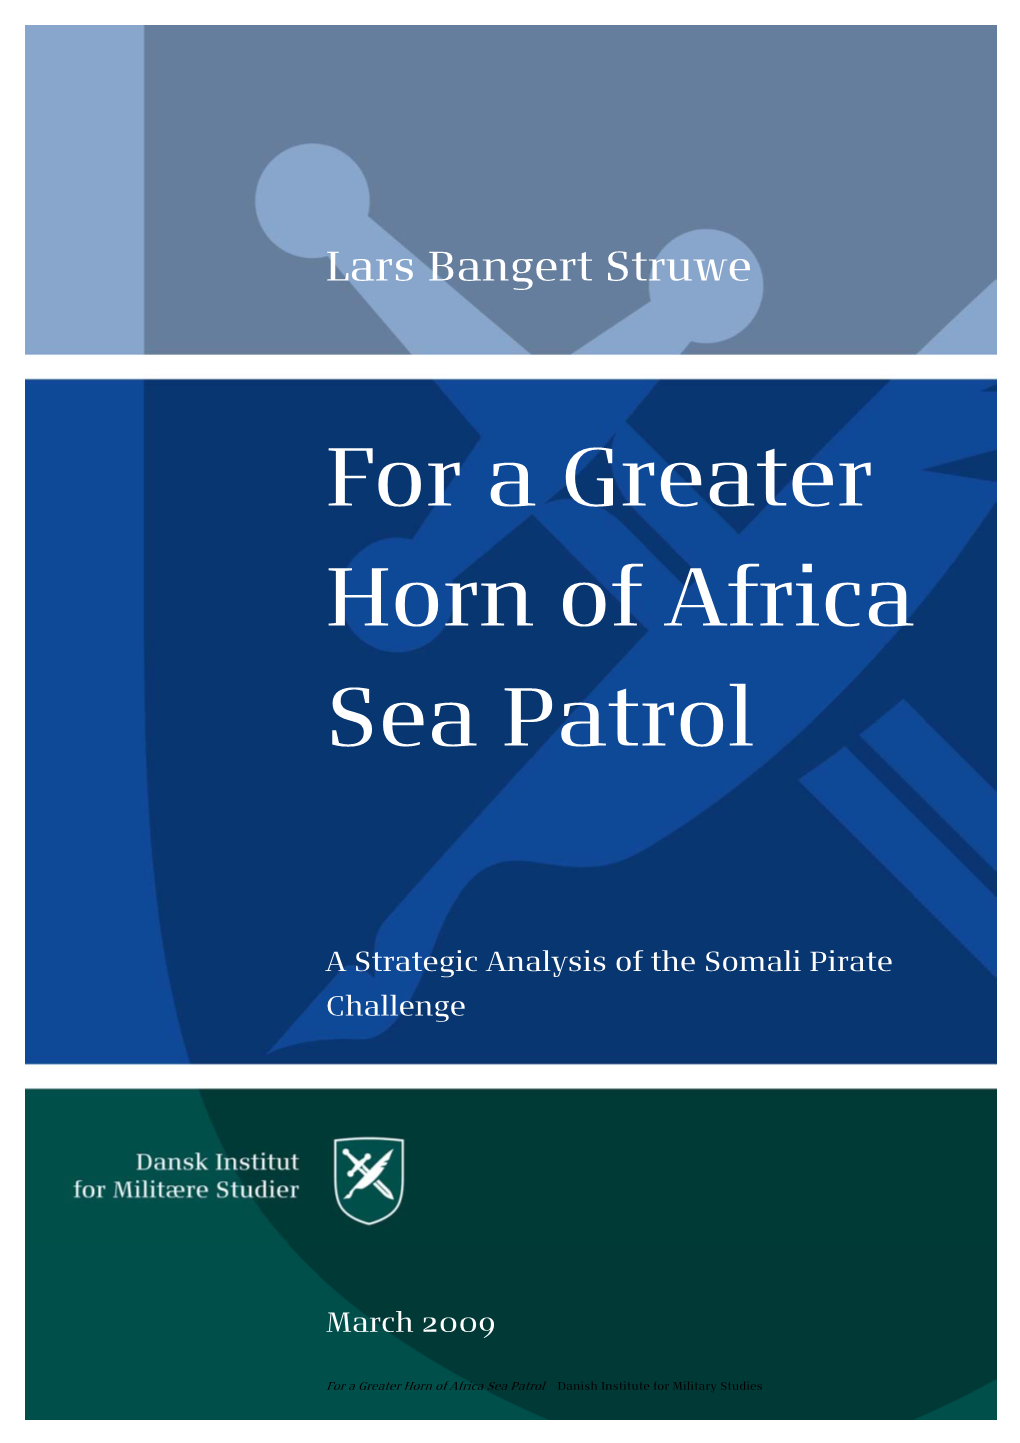 For a Greater Horn of Africa Sea Patrol